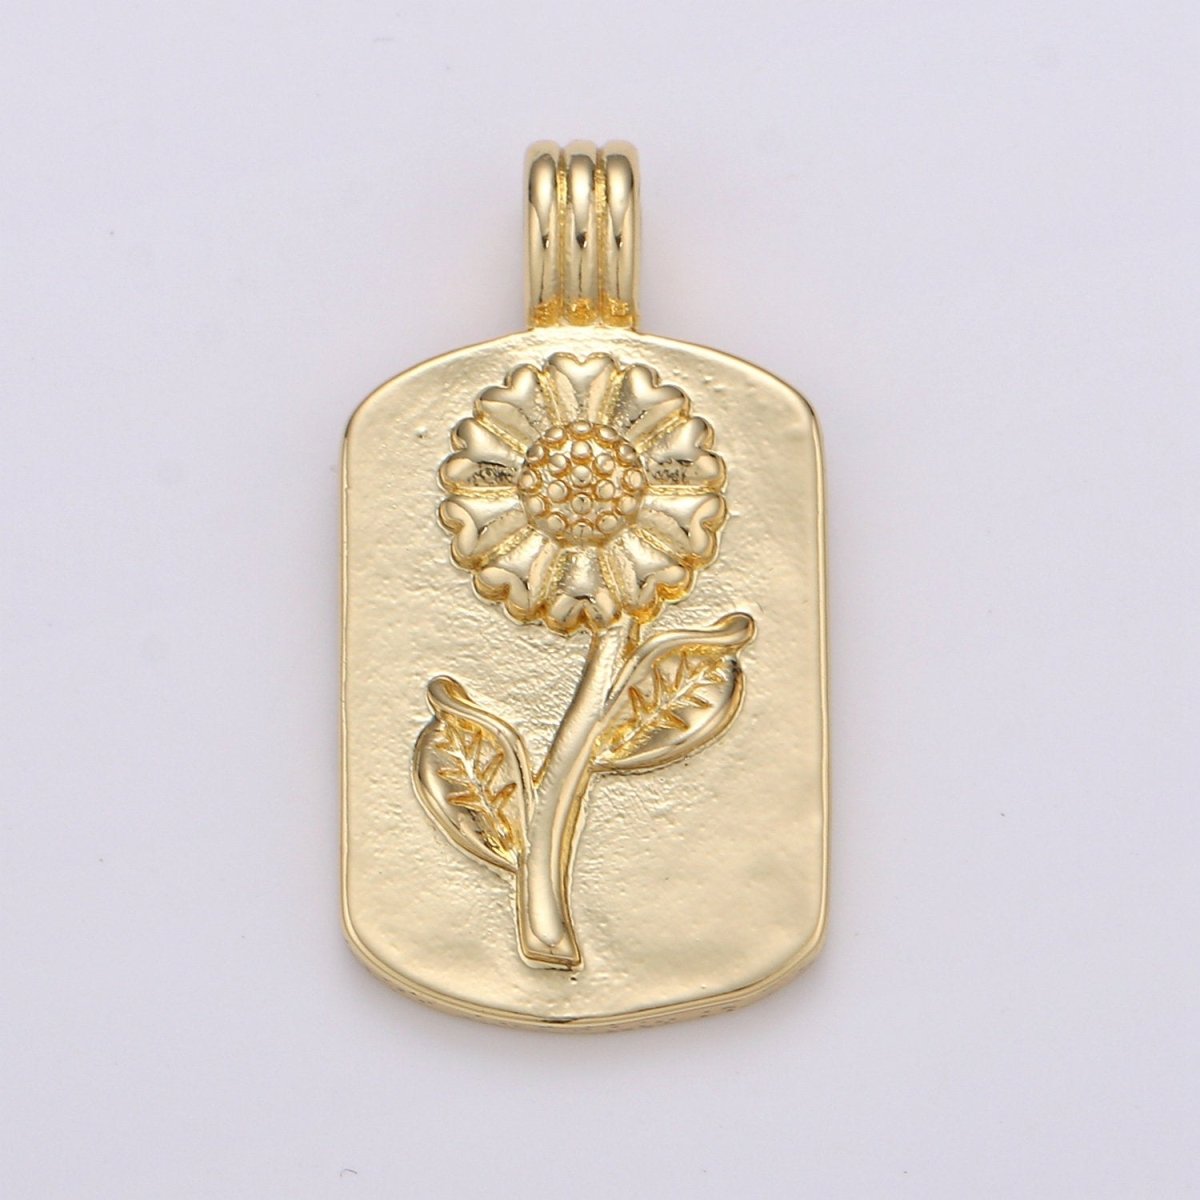 14K Gf Sun Flower Charms, Gold SunFlower Pendant, Dainty Flower Charm, Small Medallion Charm for Necklace Floral Flower Jewelry H-841 - DLUXCA